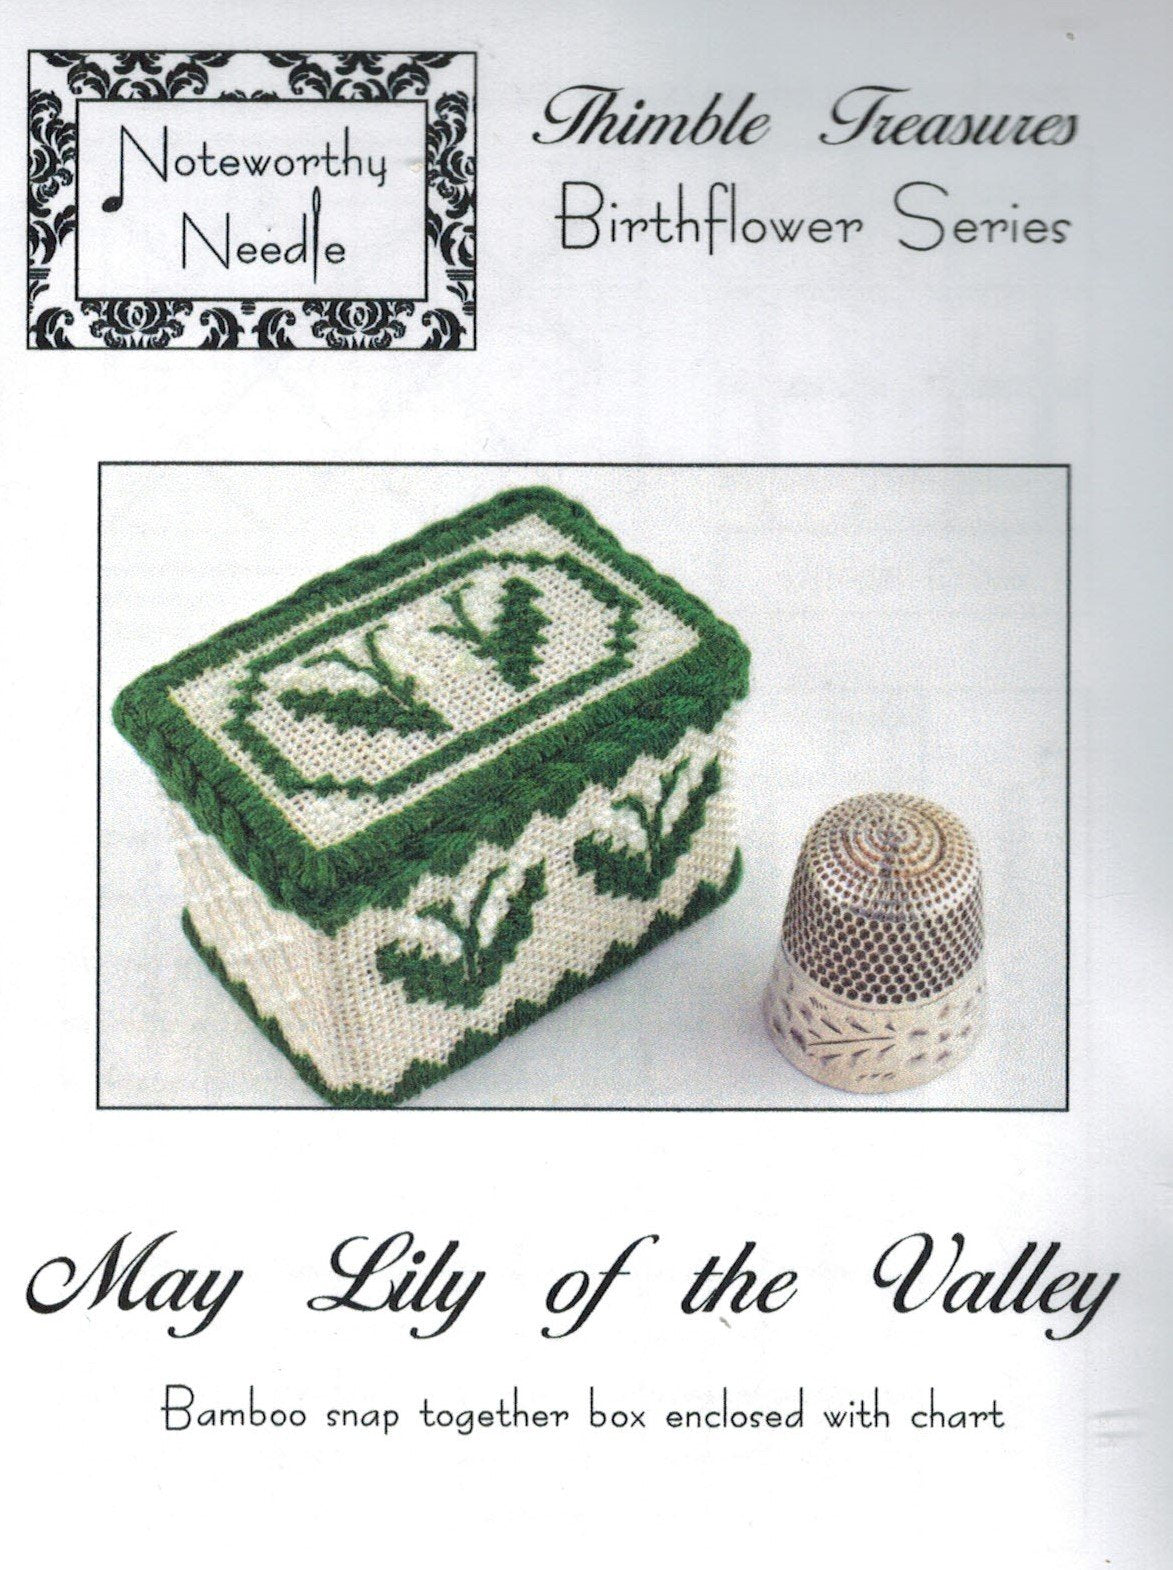 NWND - Thimble Treasures - Birth Flower Series: 05 - May Lily of the Valley